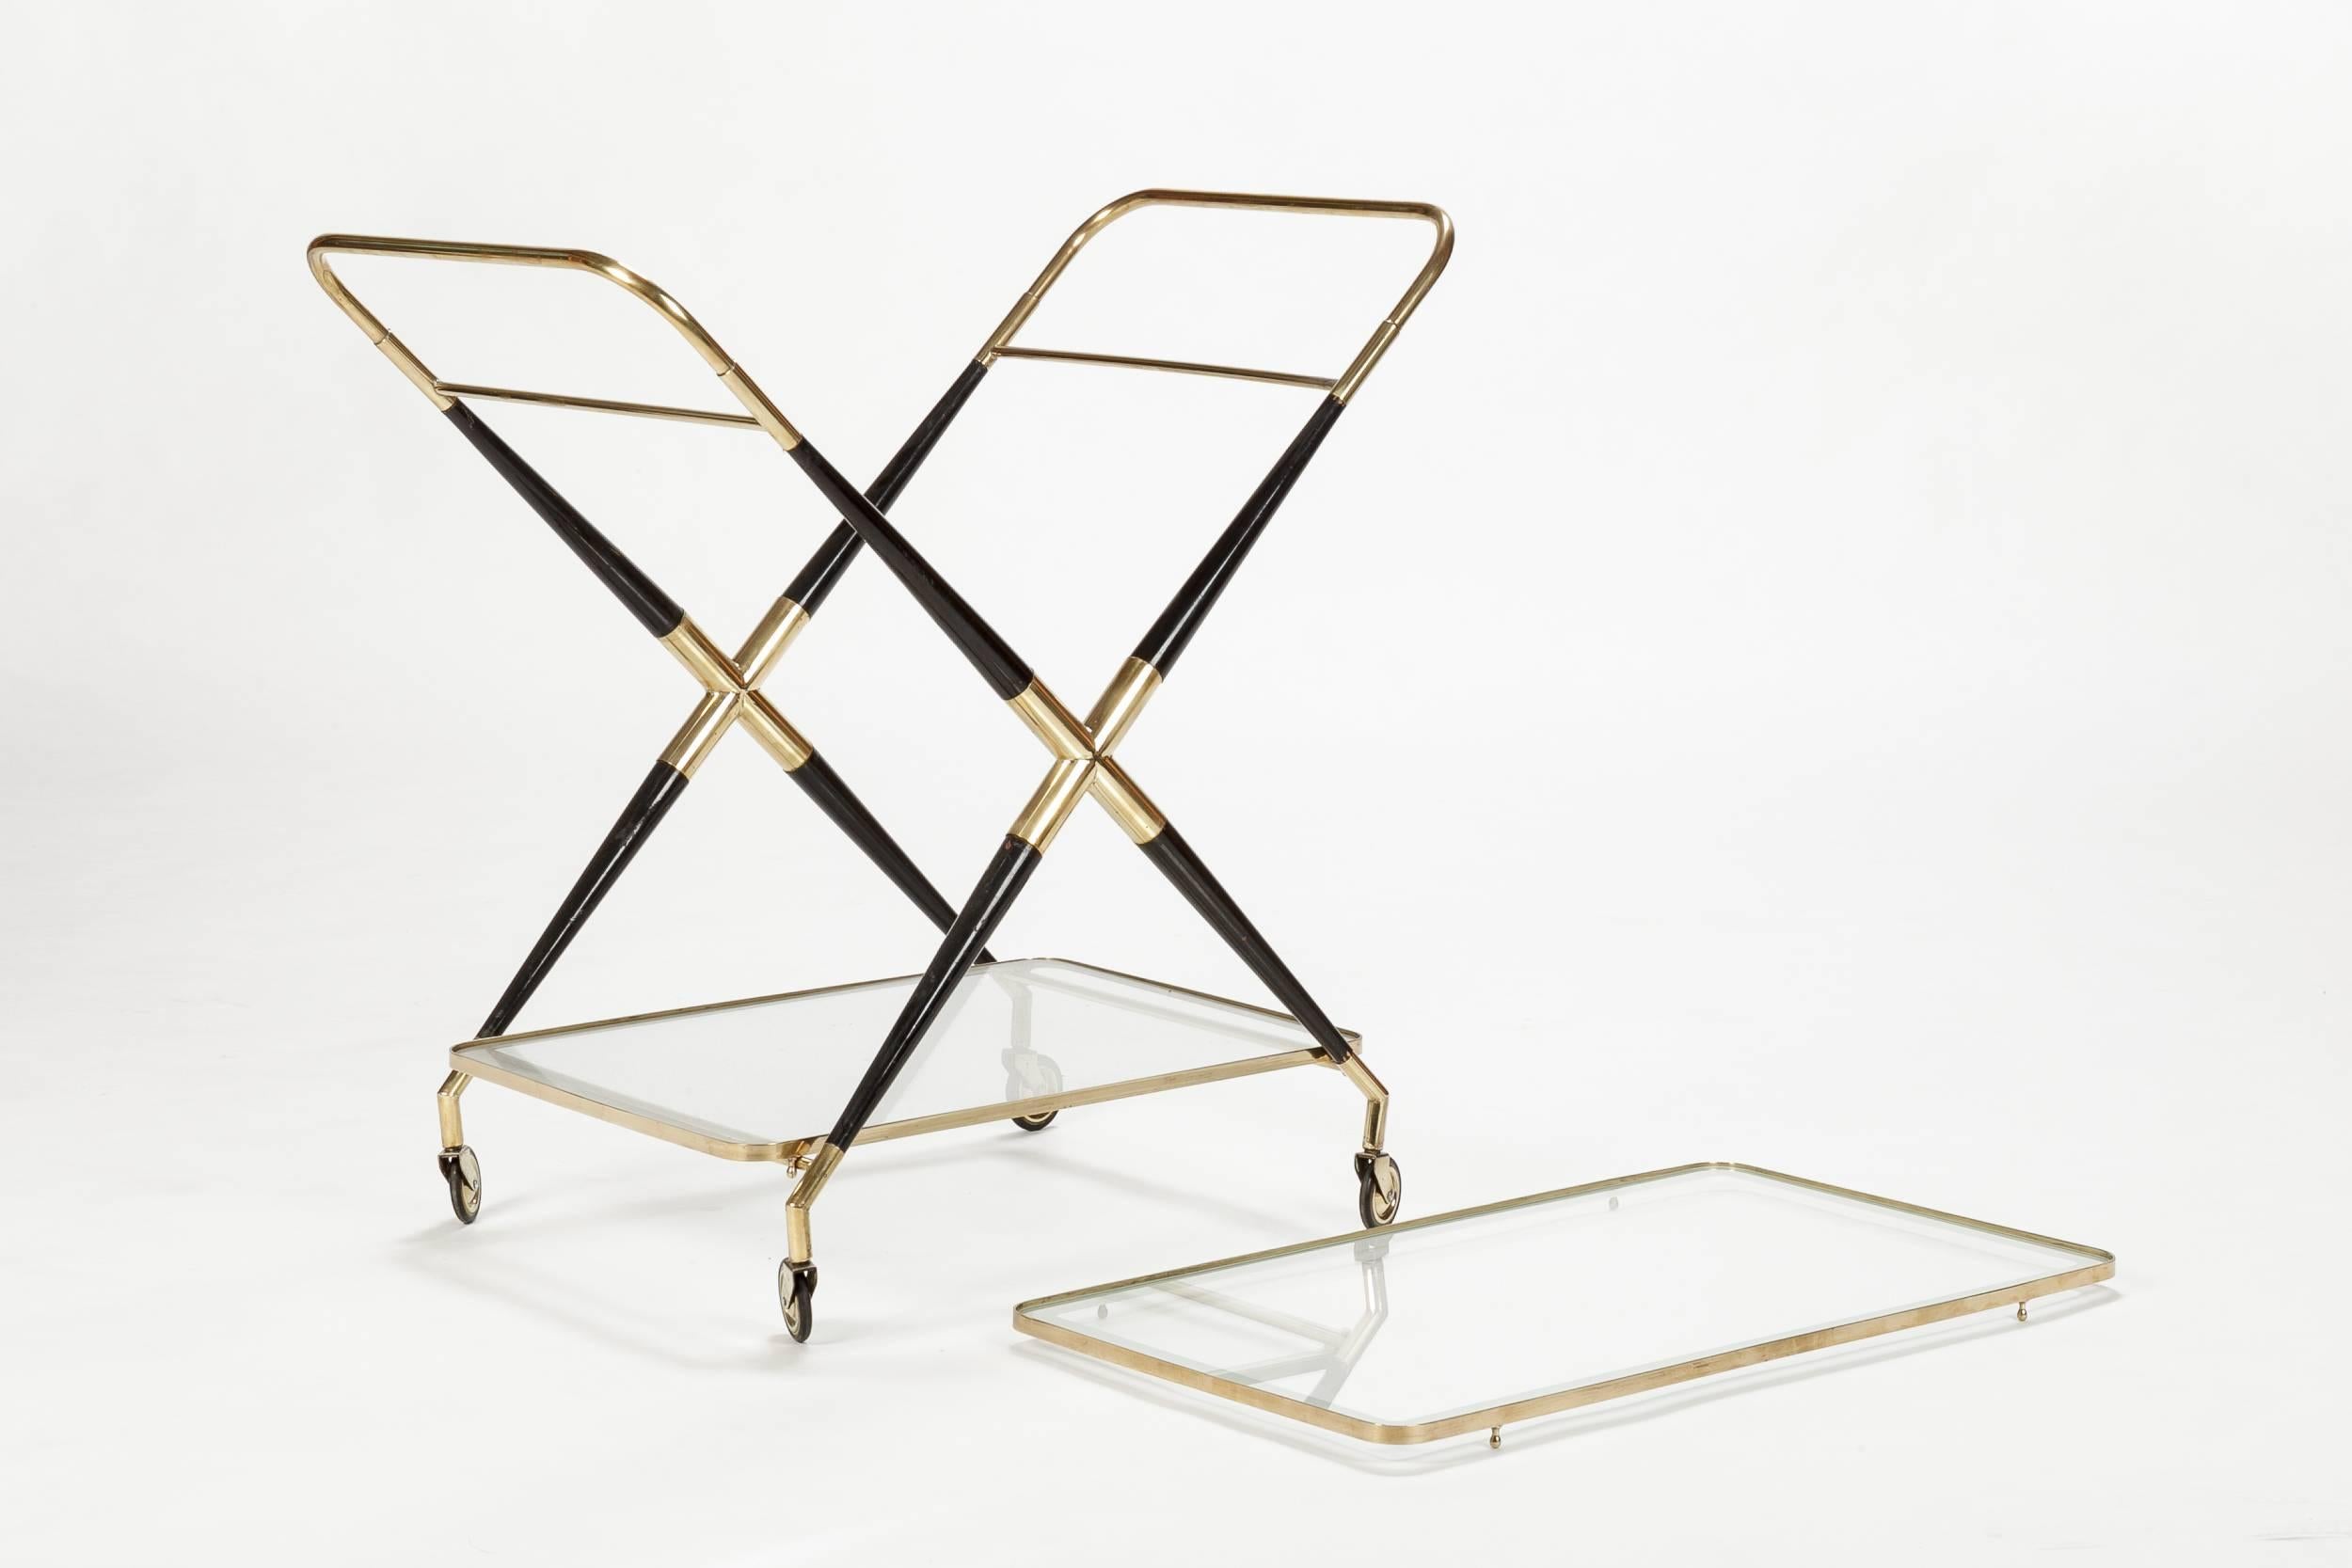 A stunning Cesare Lacca bar cart, manufactured in Italy in the 1950s. Very elegant and reduced form with a frame of solid brass and shiny lacquered black mahogany, shelves are made of glass with etched borders. The glass shelves can be removed to